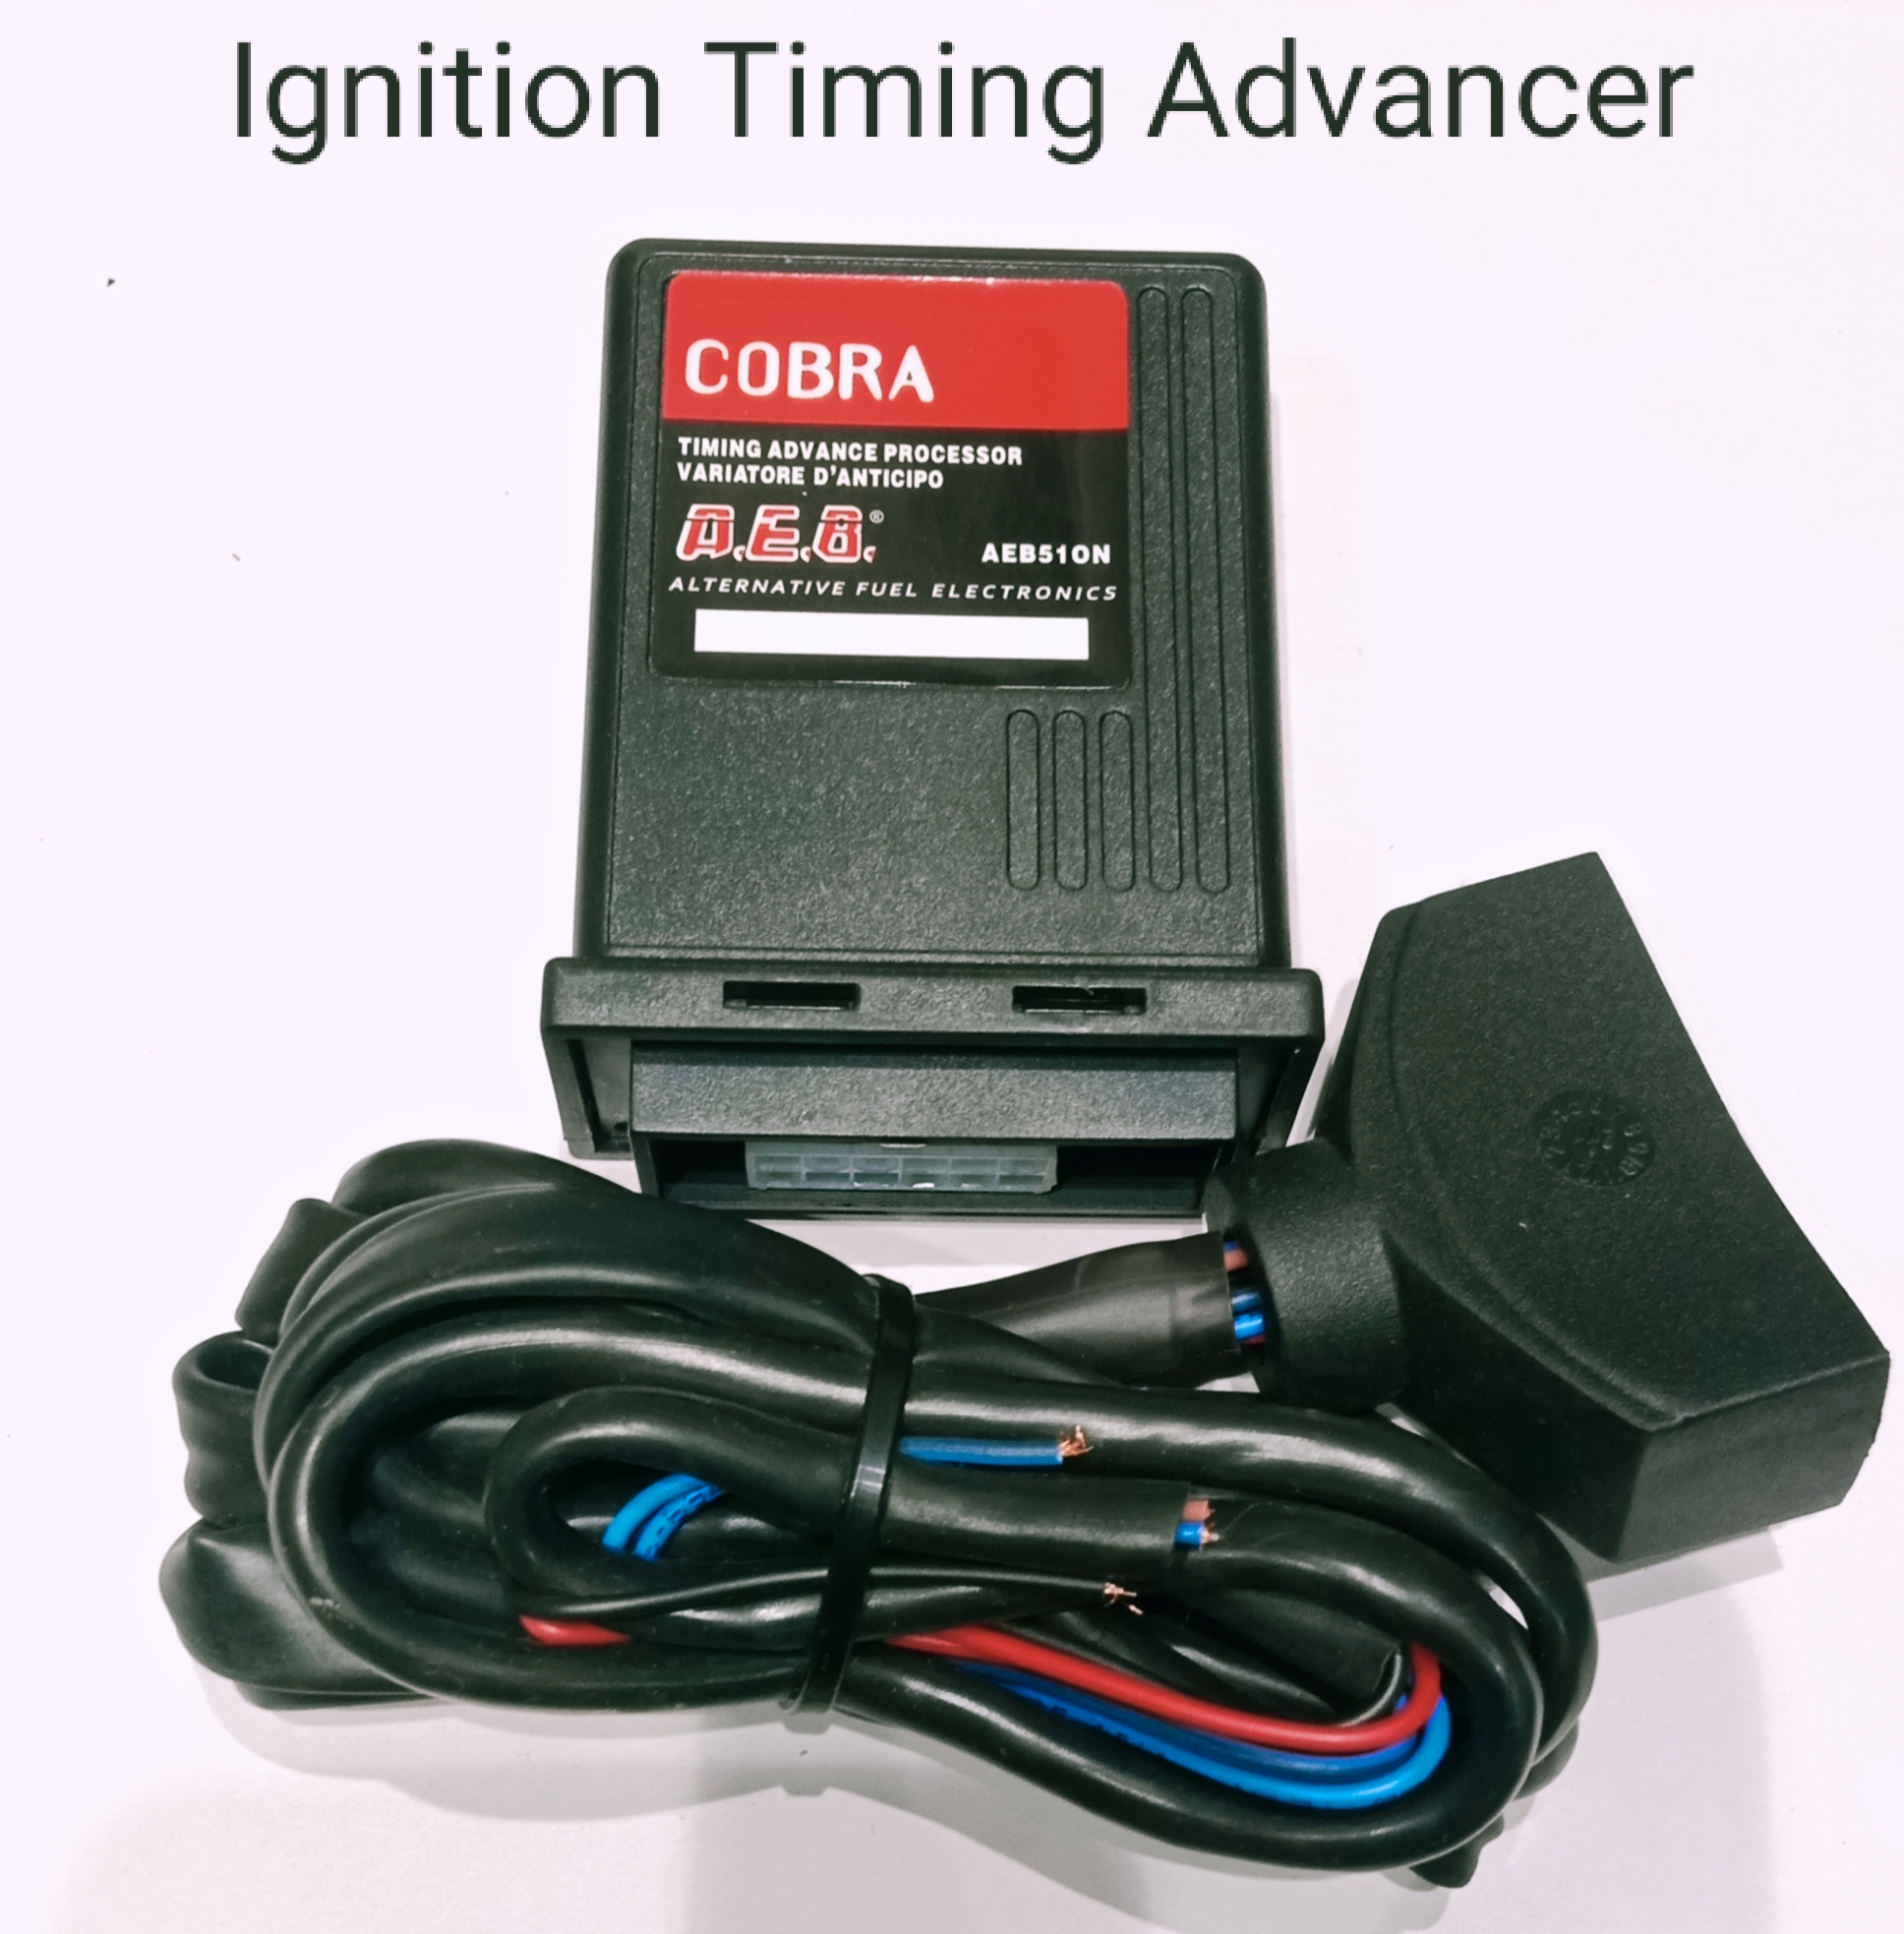 CNG Timing Advancer | Livon Gas Equipments | CNG Timing advancer, LPG Timing Advancer, CNG Sequential Kit in India - GLK3956